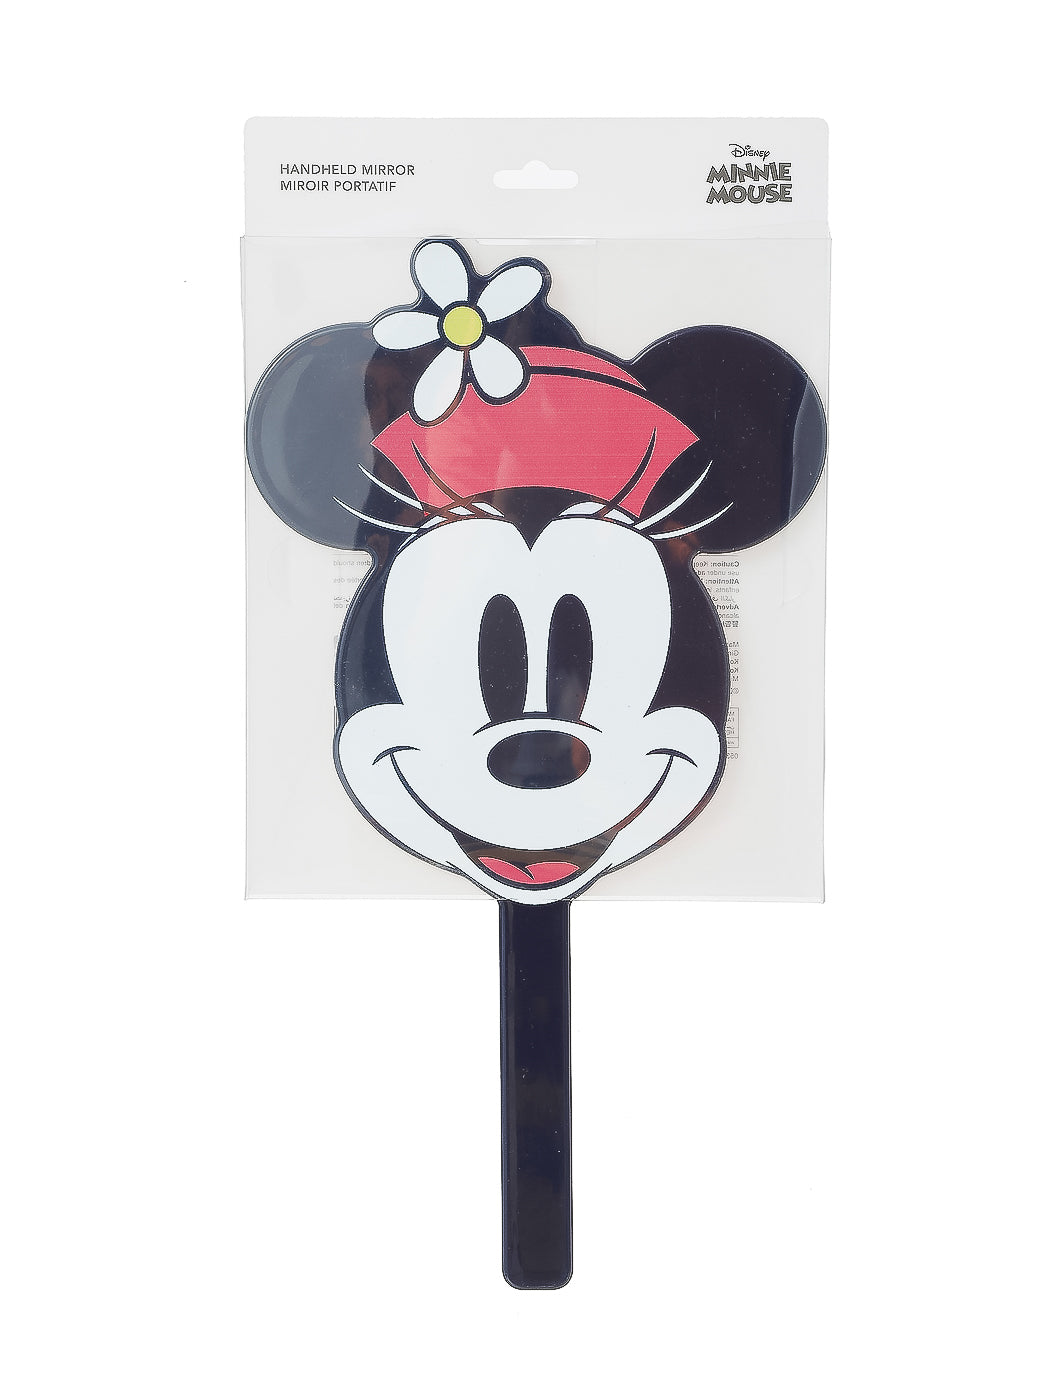 MINISO MICKEY MOUSE COLLECTION 2.0 HANDHELD MIRROR(MINNIE) 2010530110108 PORTABLE MIRROR